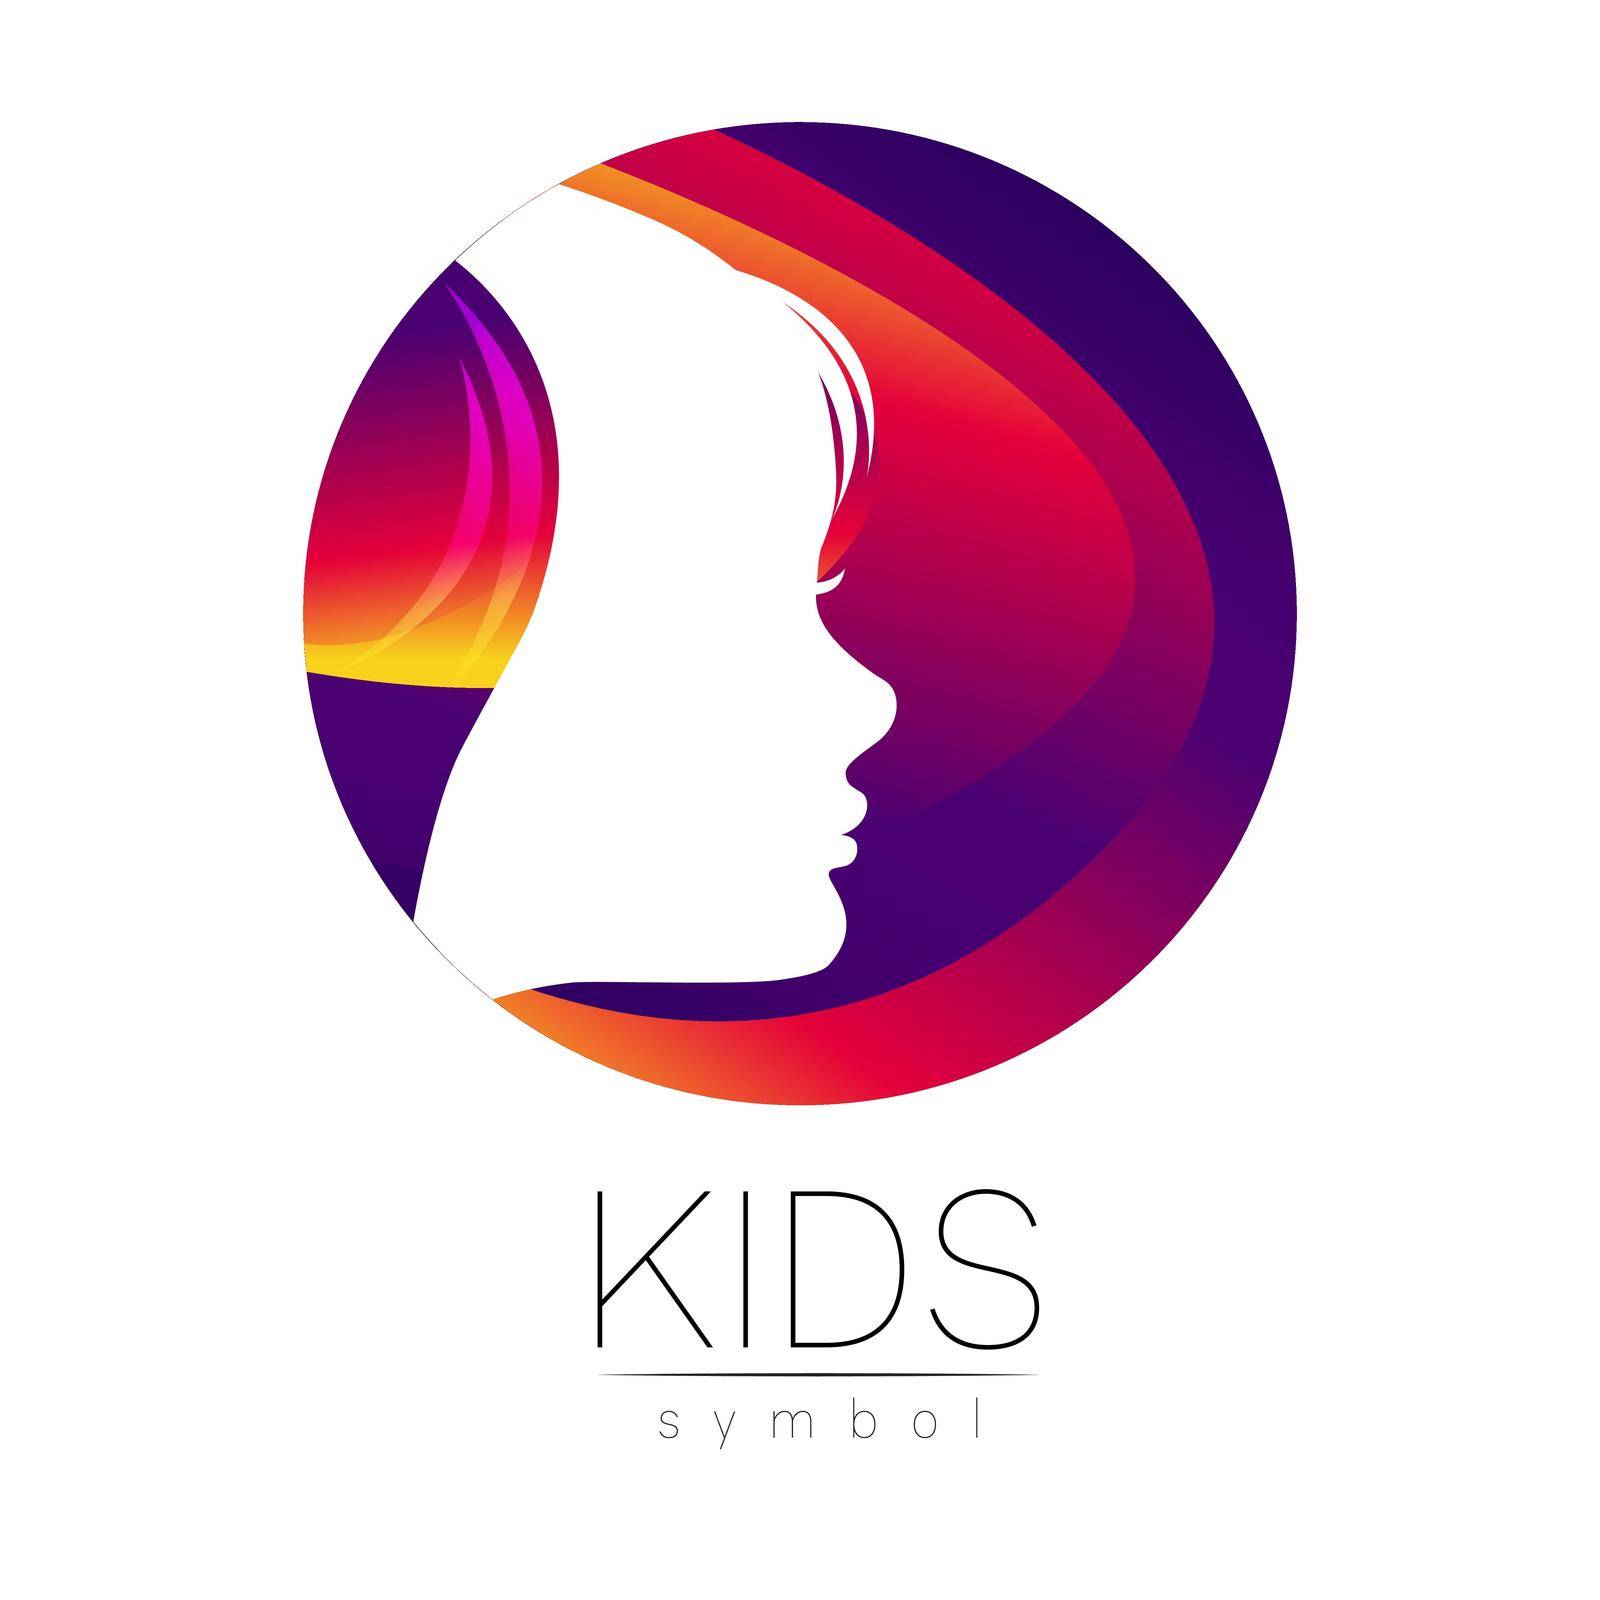 Child Girl Vector logotype in violet circle. Silhouette profile human head. Concept logo for people, children, autism, kids, therapy, clinic, education. Template symbol design.